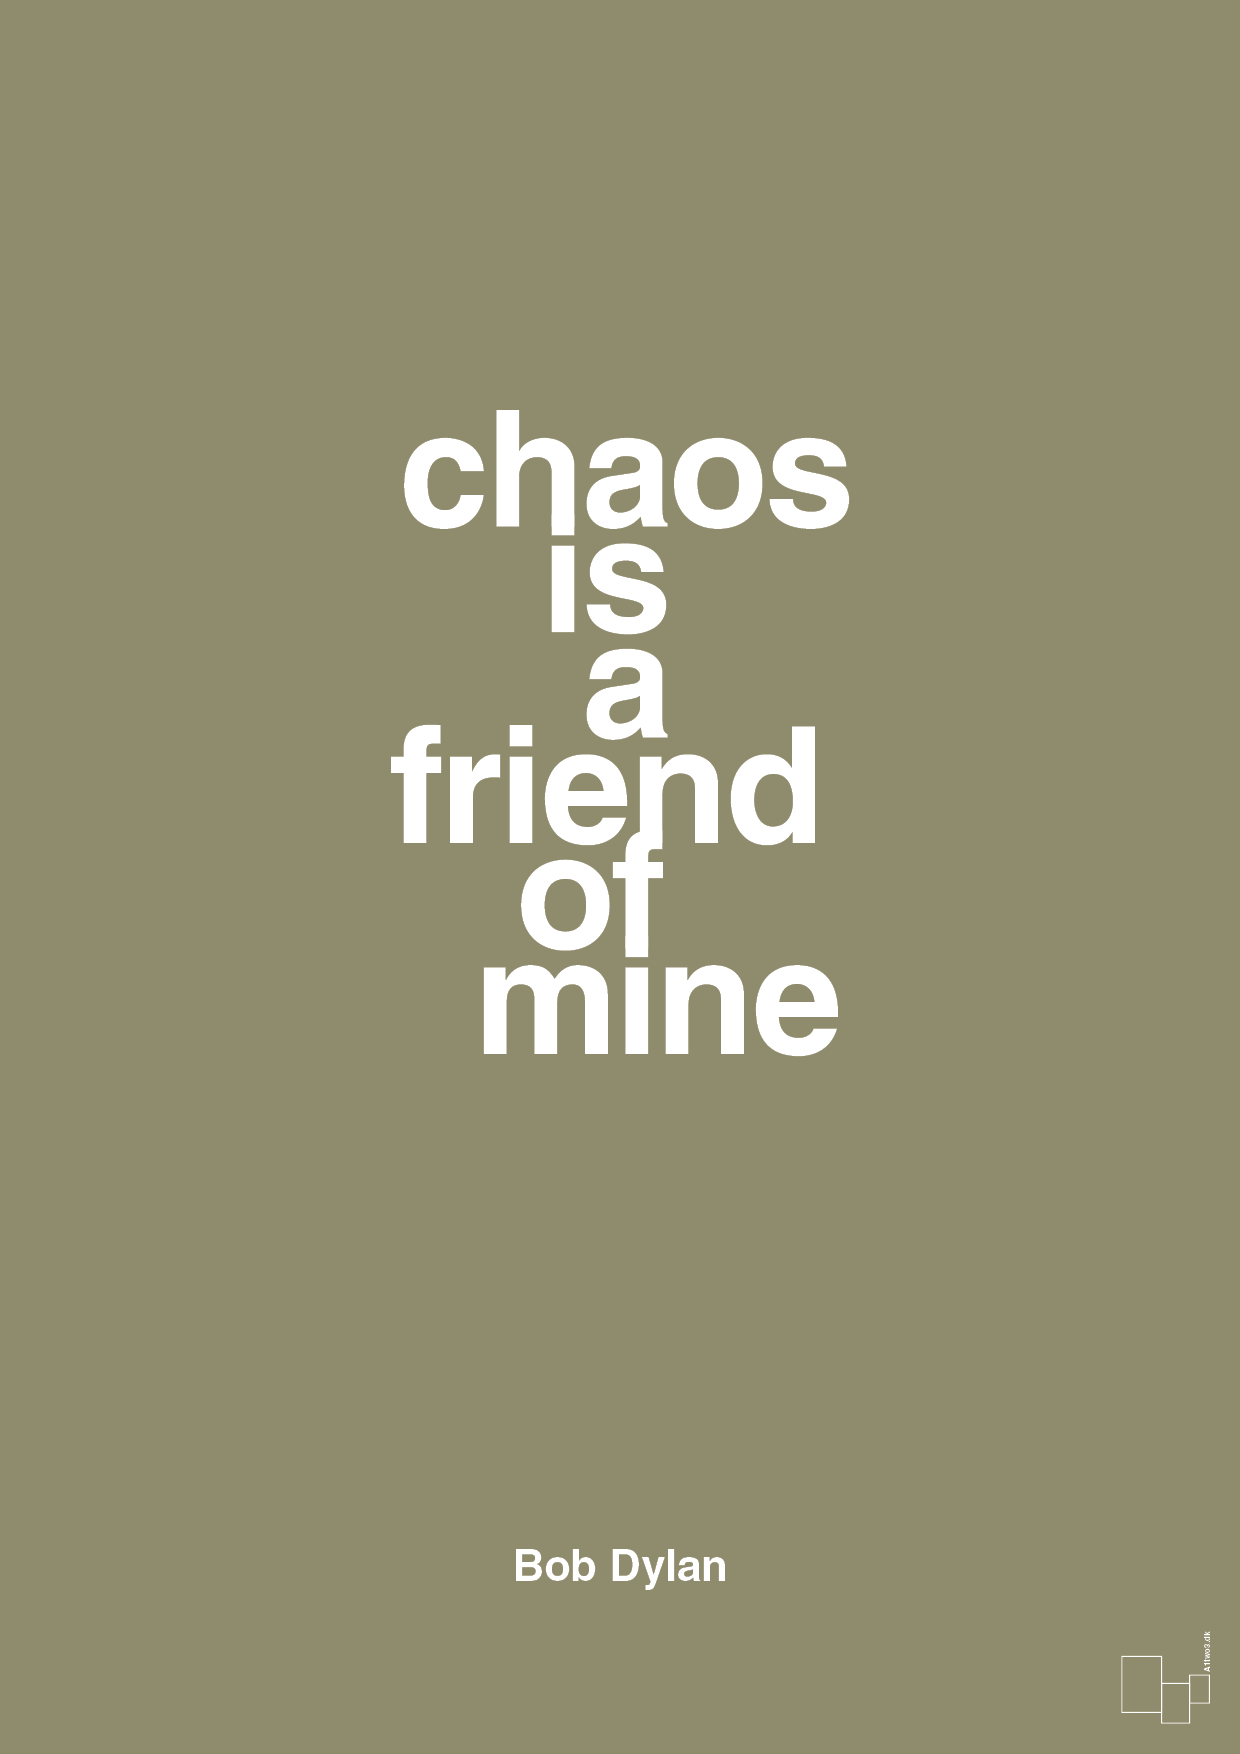 chaos is a friend of mine - Plakat med Citater i Misty Forrest